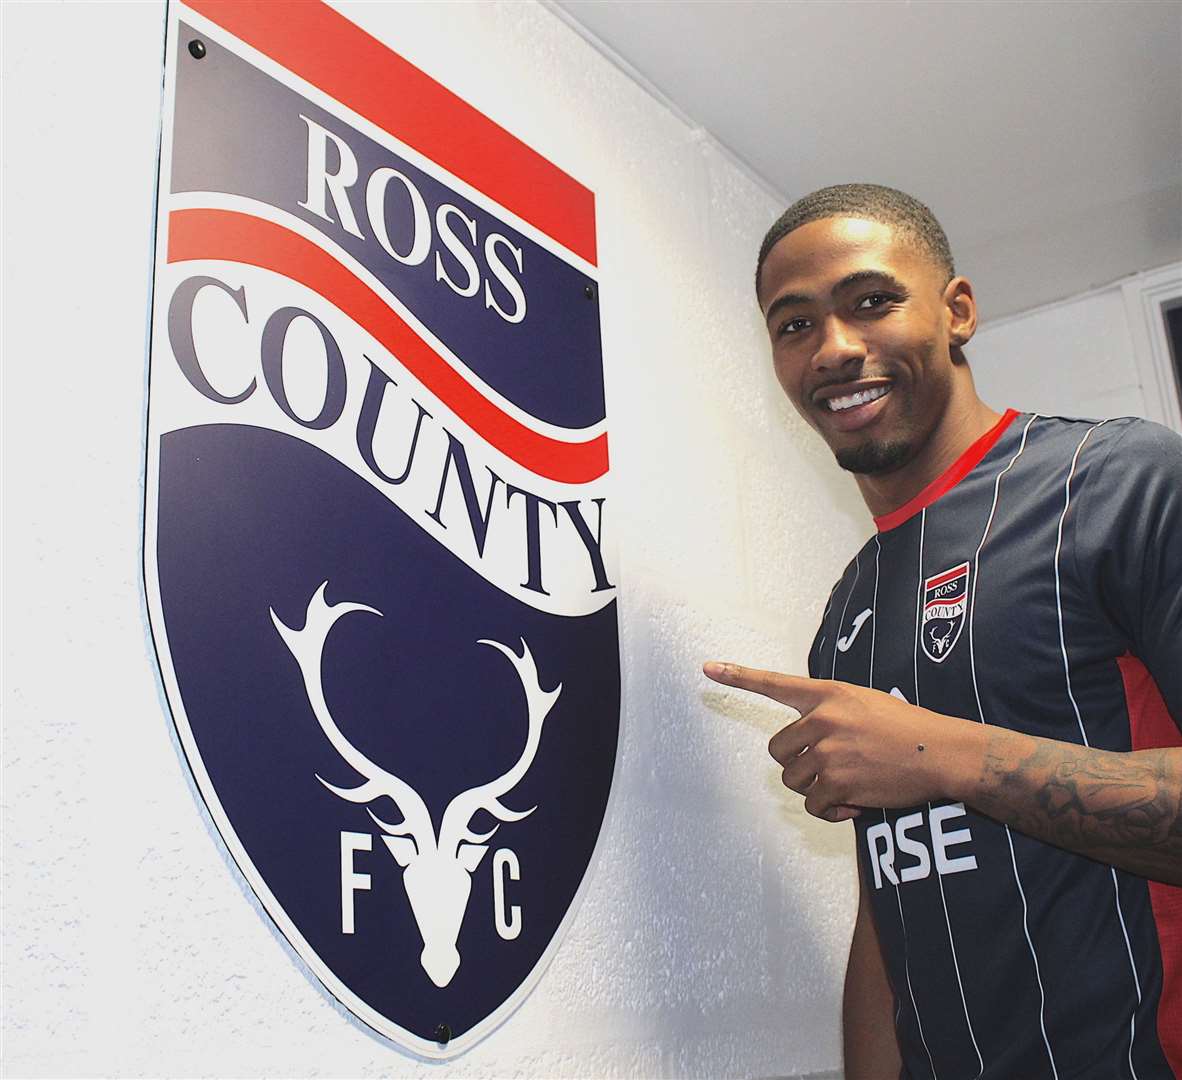 Ross County have made Kayne Ramsay their second signing of the January transfer window, bringing the Southampton defender in on loan for the rest of the season.